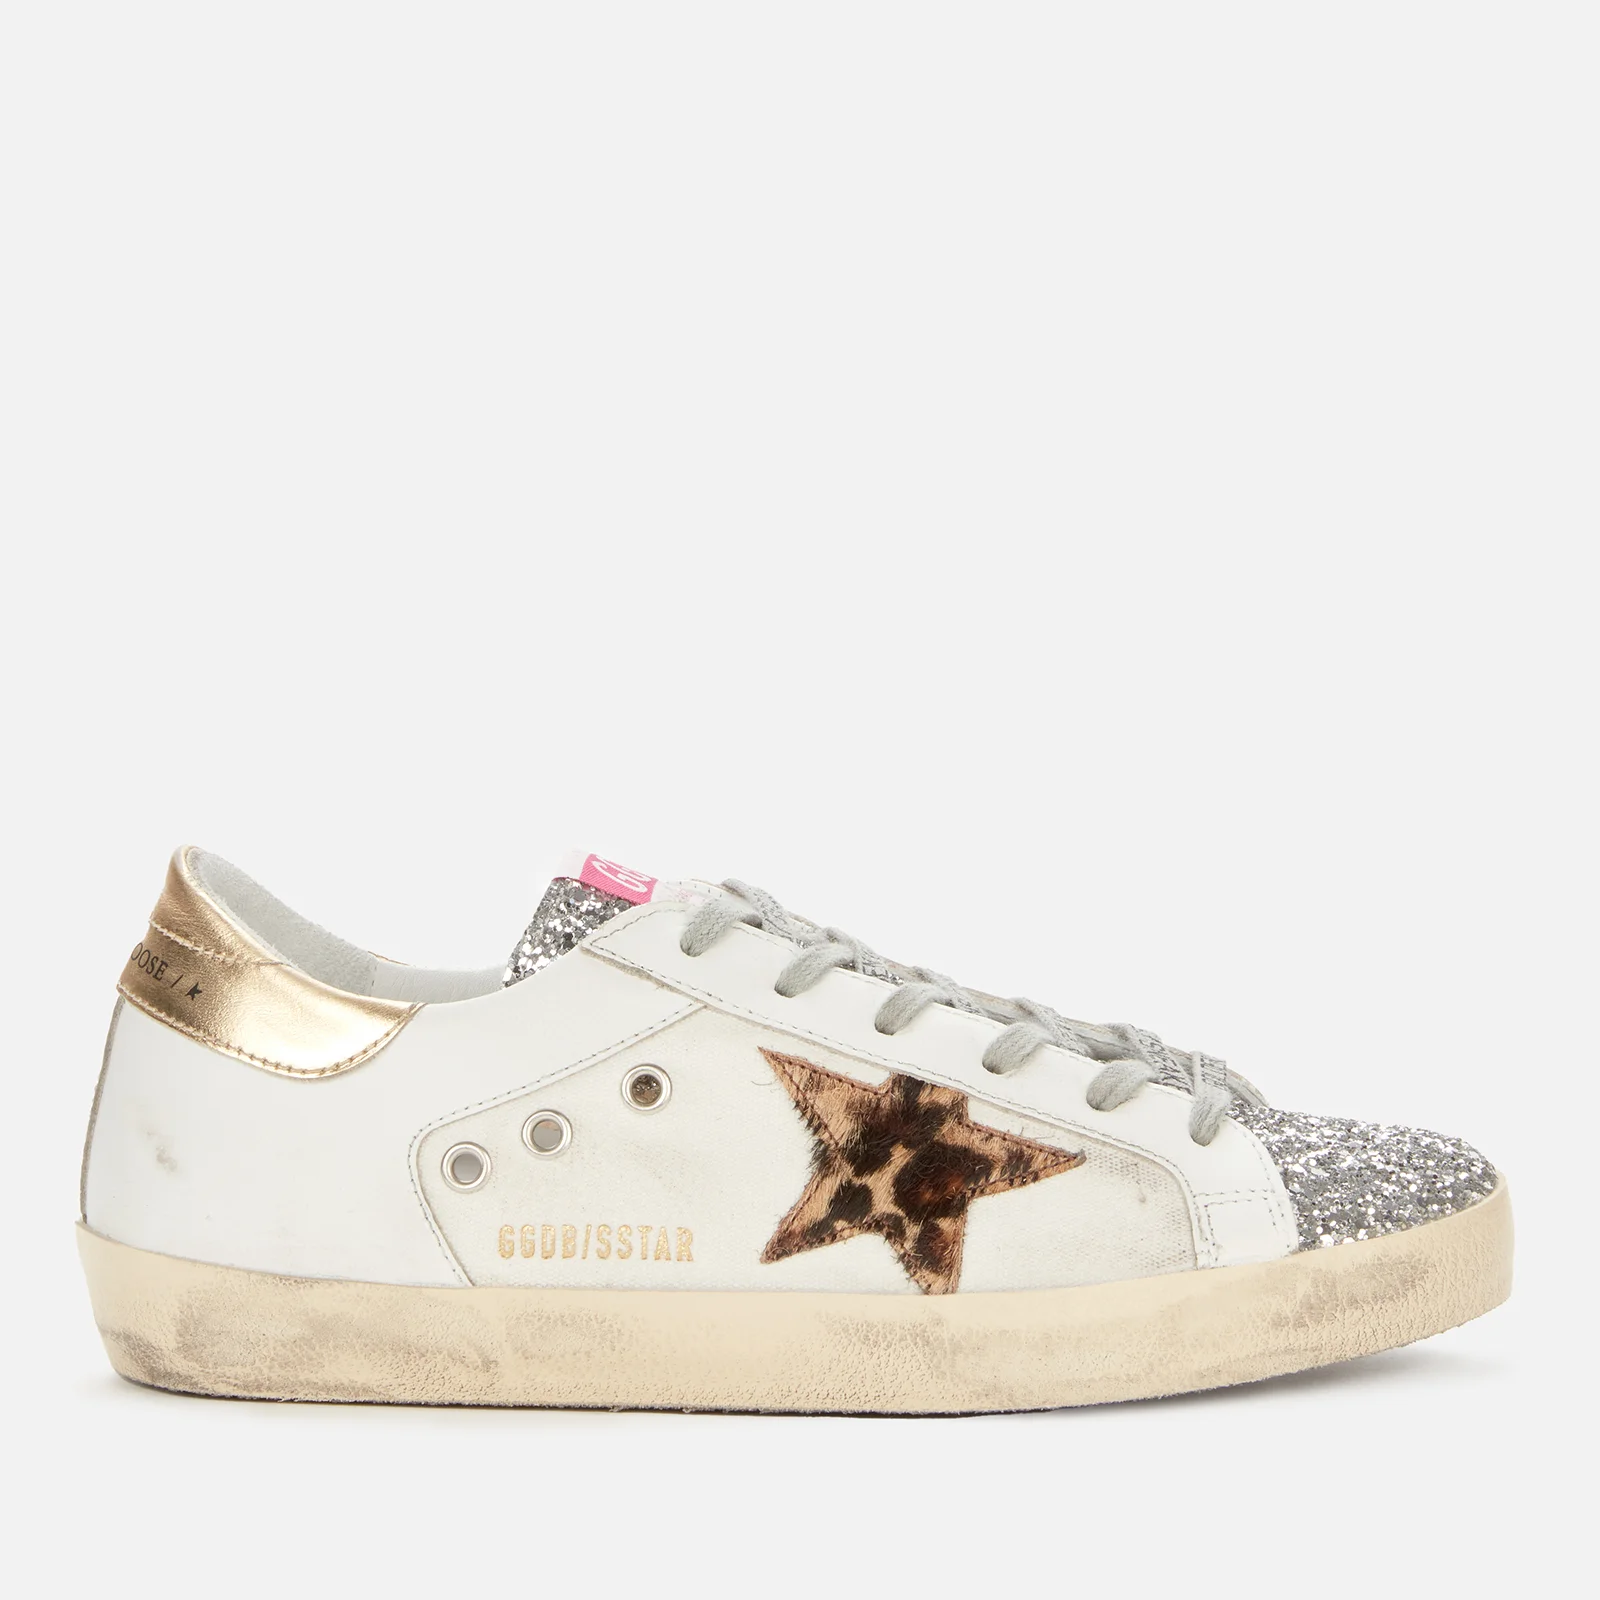 Golden Goose Women's Superstar Leather/Canvas Trainers - White/Silver/Beige Image 1